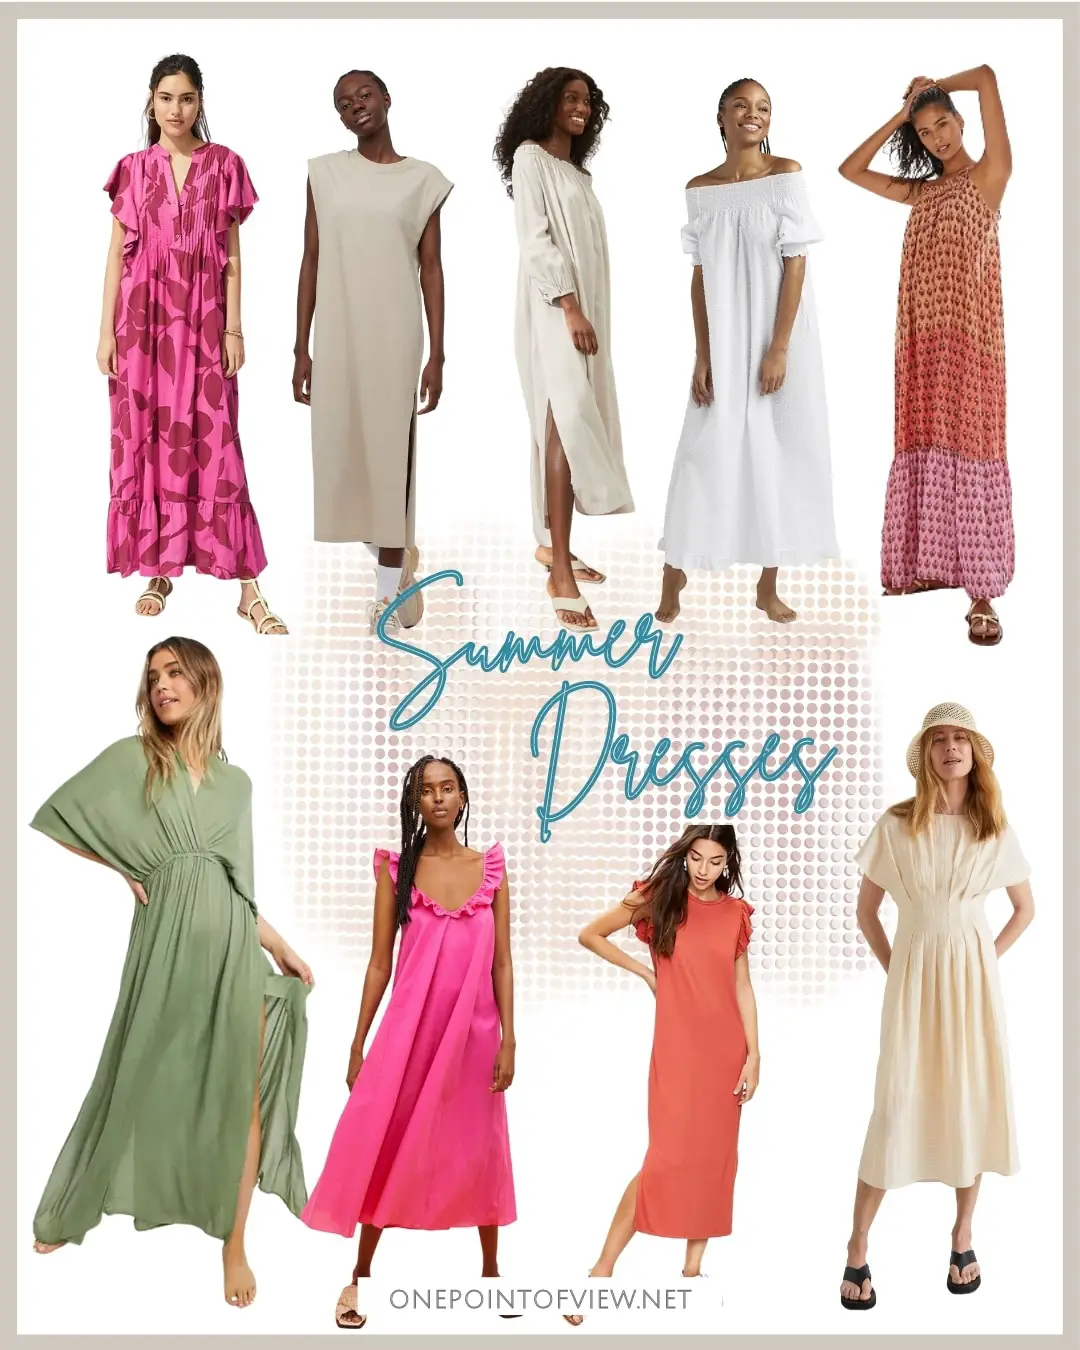 Stylish house dresses - Super Chic Loungewear You Can Wear Outside